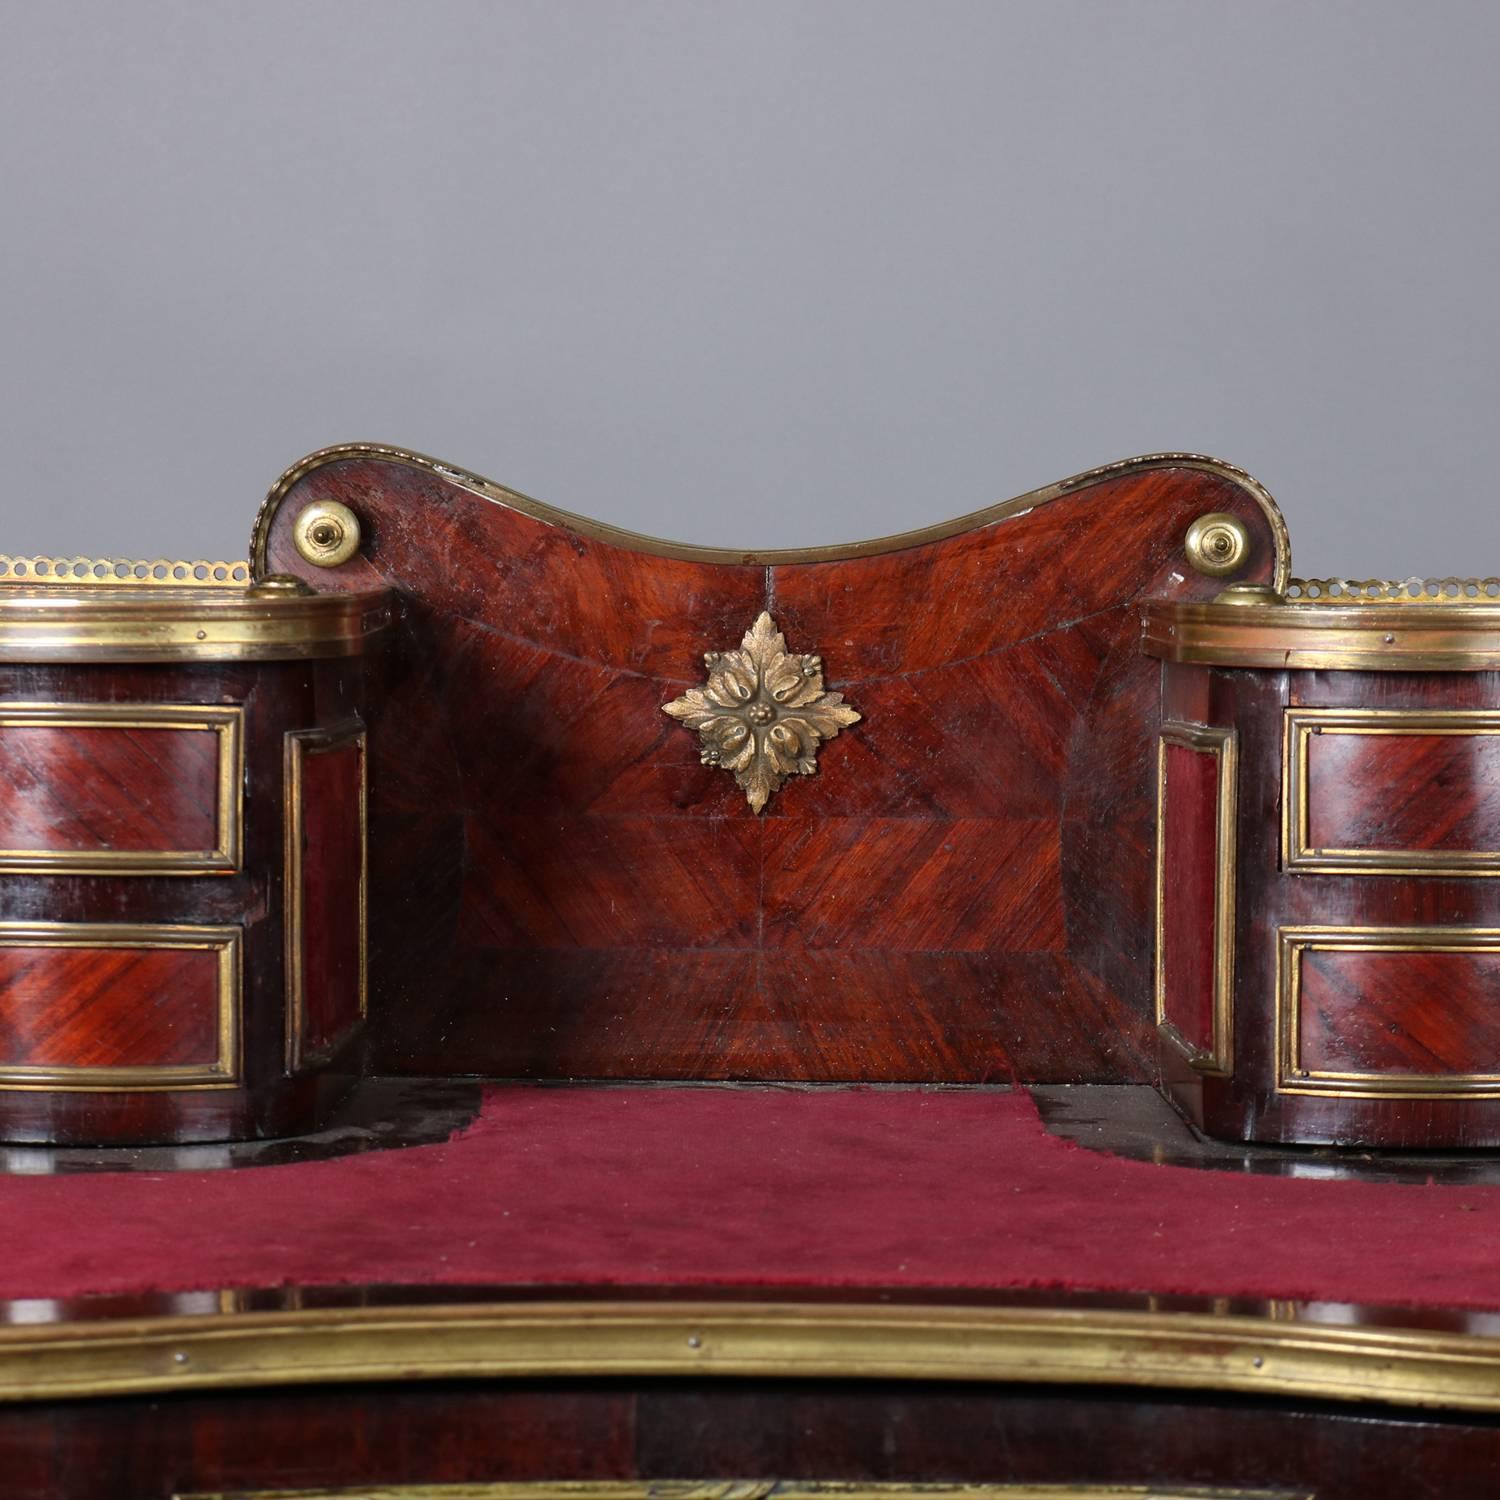 Antique French Louis XIV Style Bonheur de Jour (ladies' desk) features bookmatched rosewood with ormolu trim and mounts throughout, locking central drawer with key,  seated on cabriole legs, writing surface is felt-covered and has backsplash with